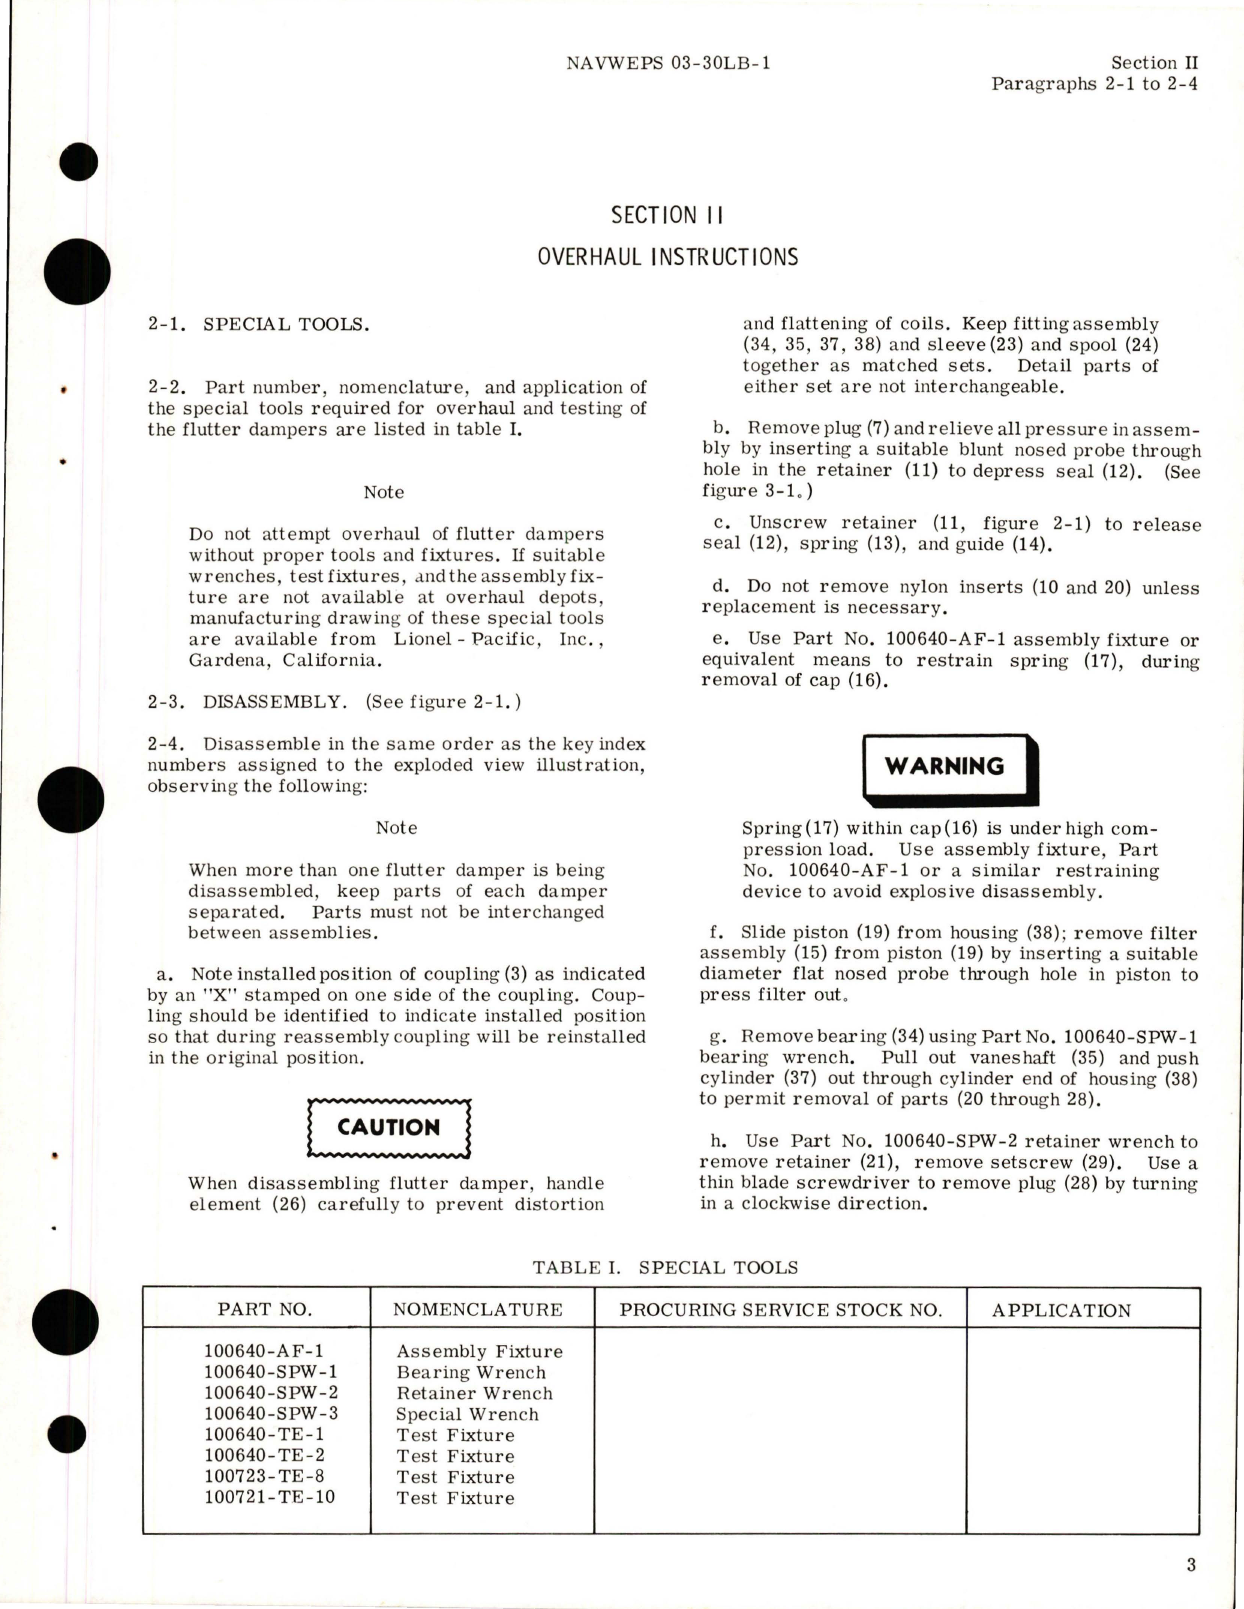 Sample page 7 from AirCorps Library document: Overhaul Instructions for Flutter Dampers - Parts 100721A, 100721A-1, 100721A-3, 100723A & 100723A-1